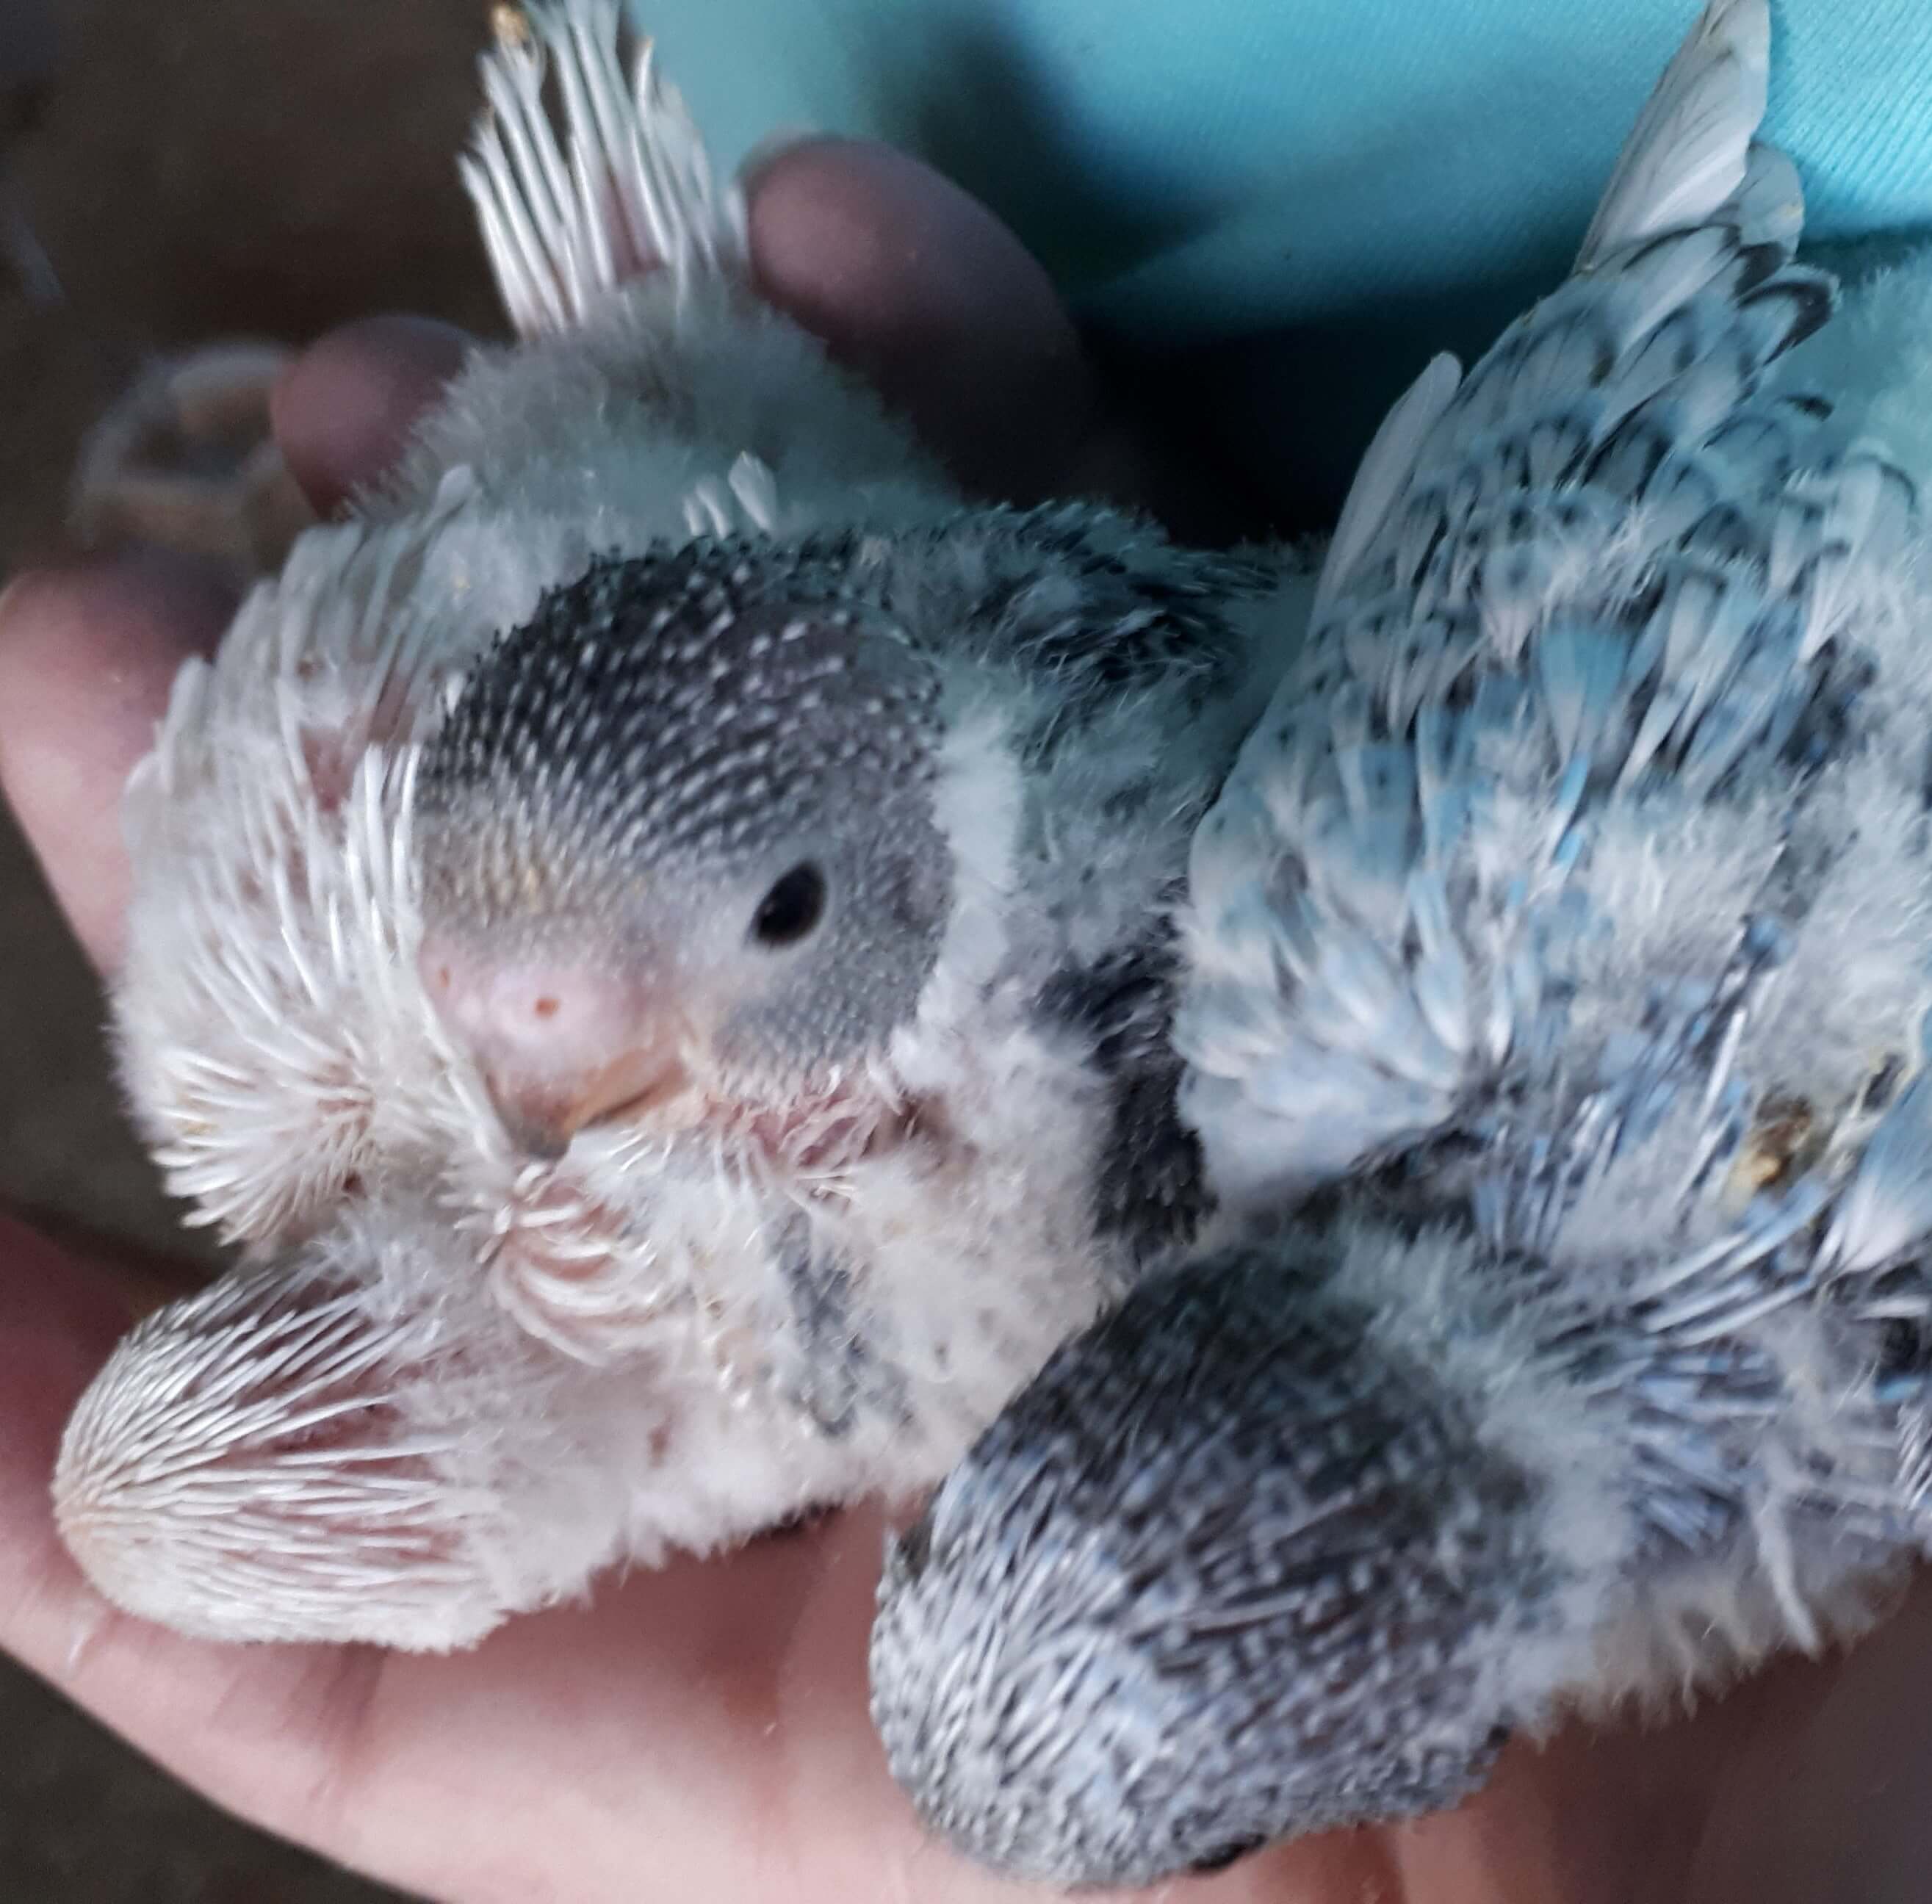 Cute Baby Budgies for sale in Geelong. A perfect pet!